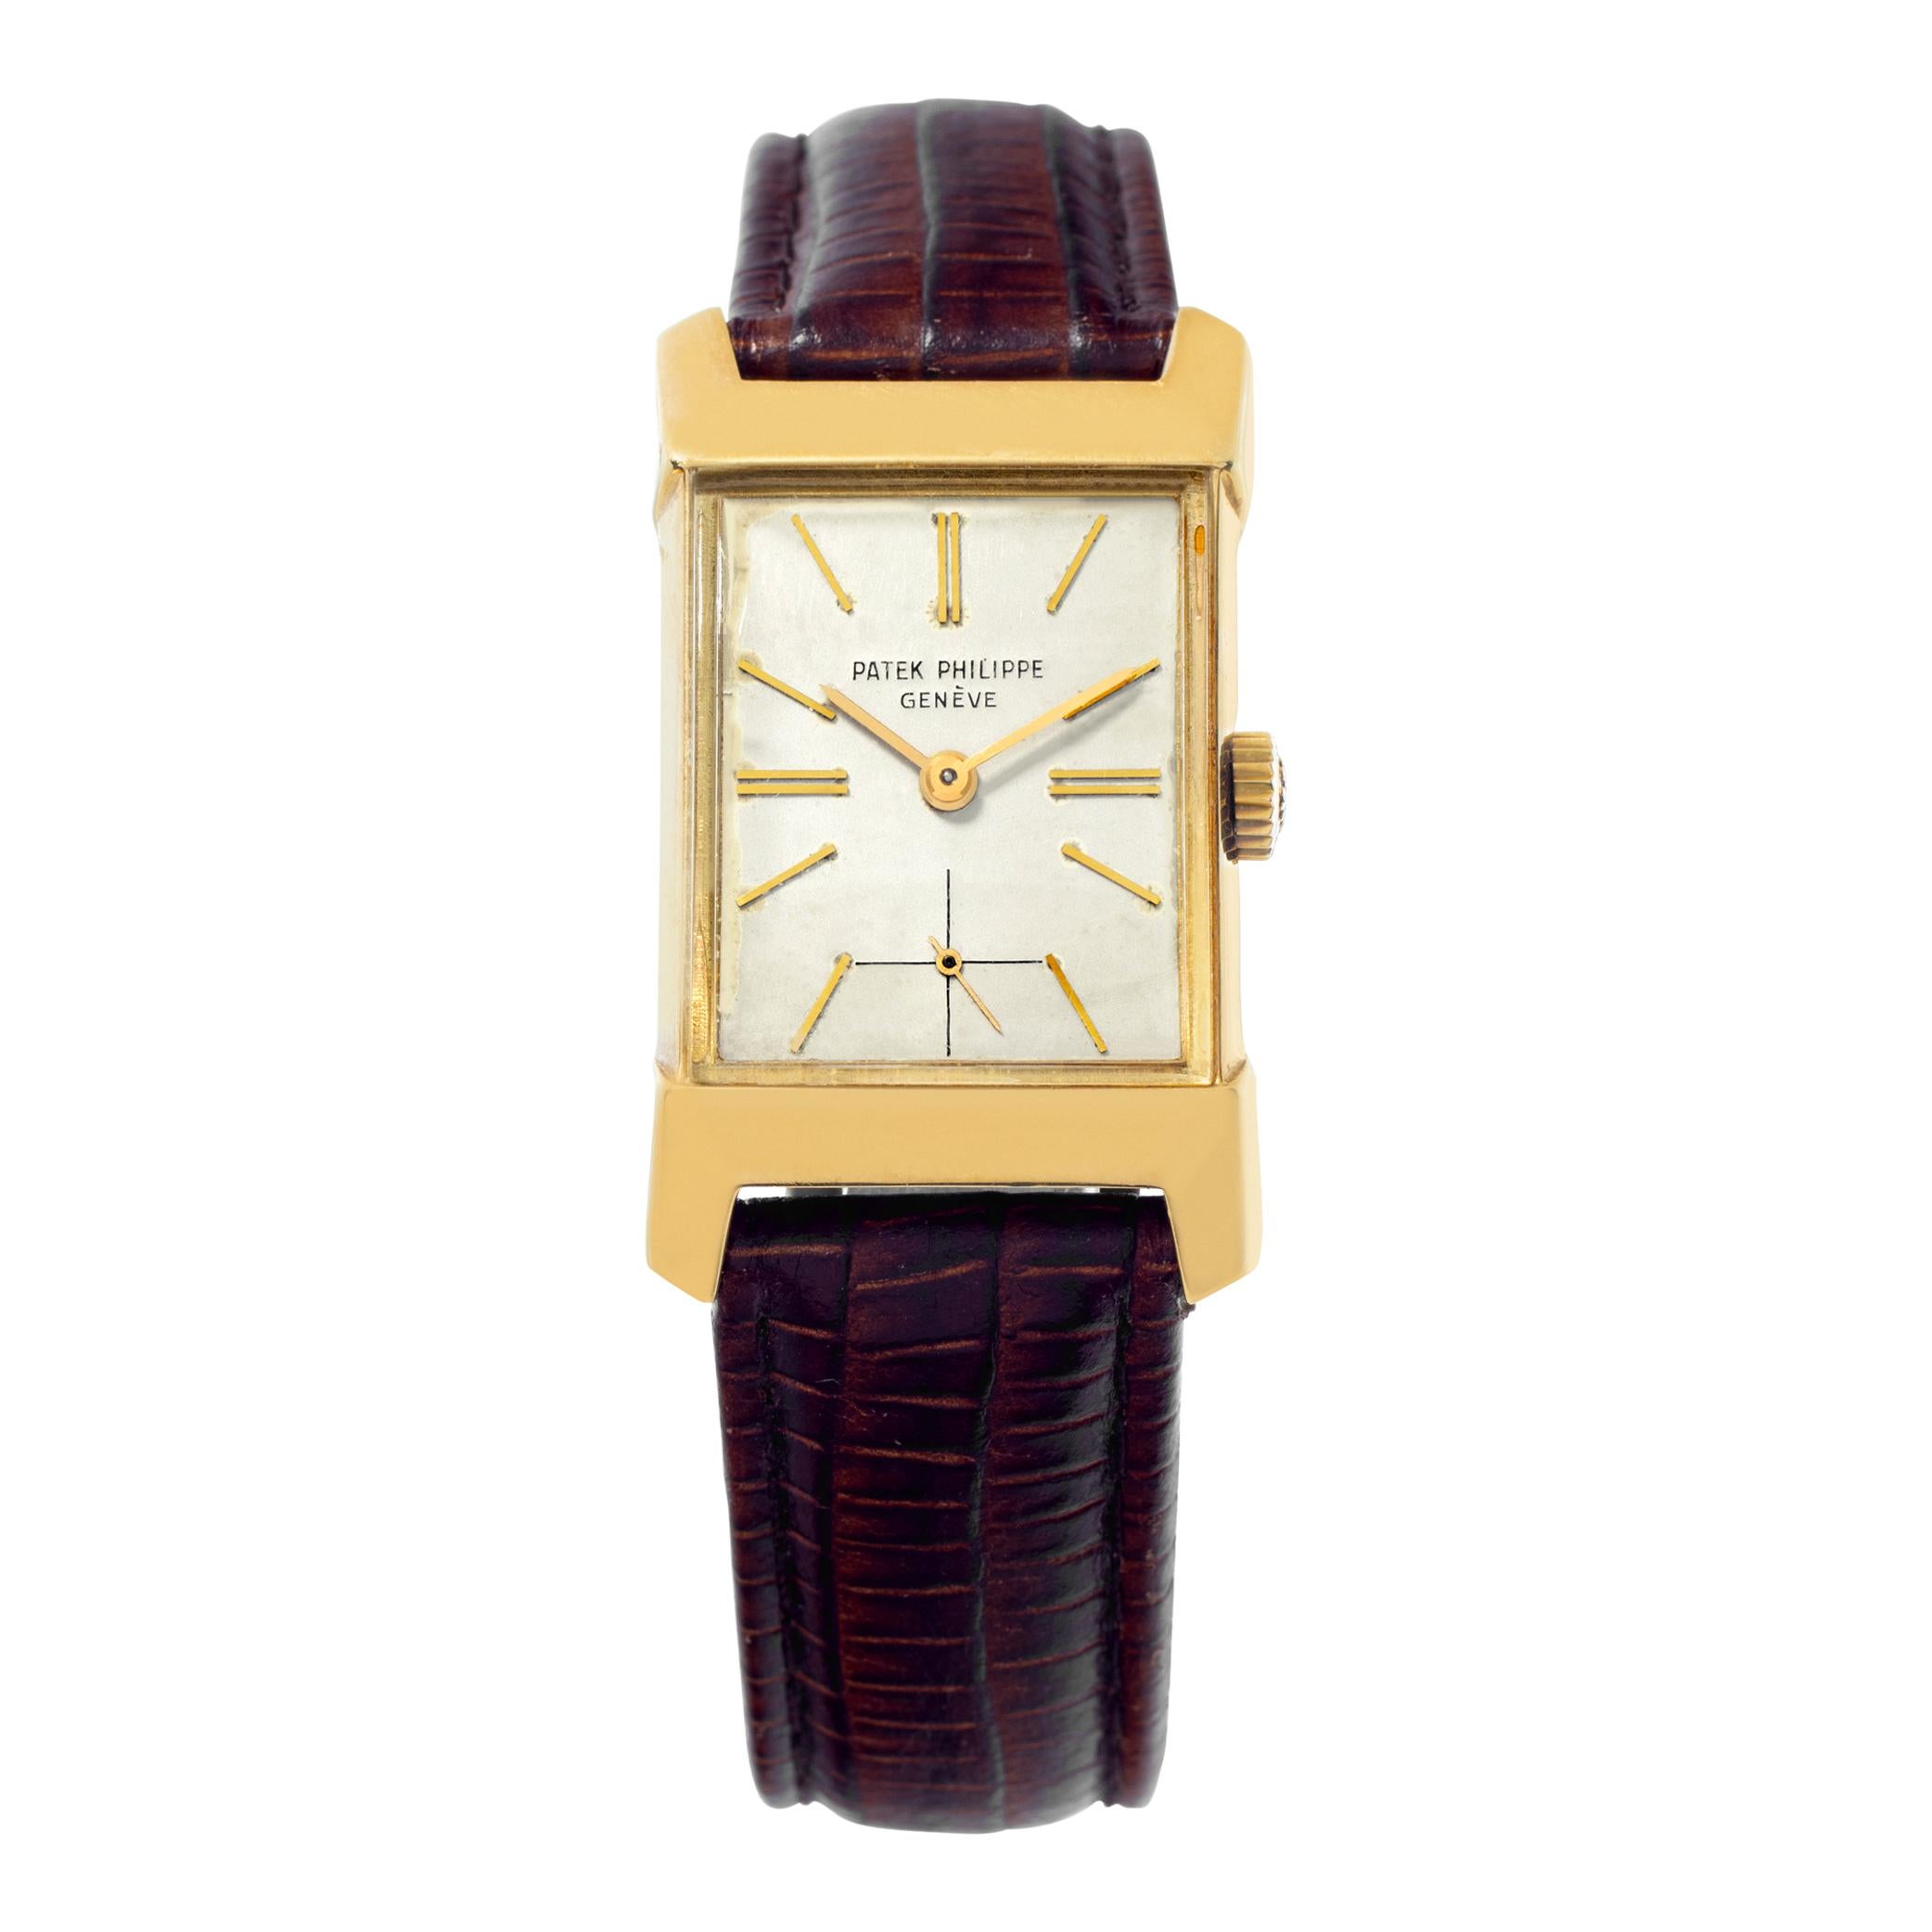 Patek Philippe Classic 2553 in yellow gold with a Grey dial 31mm Manual watch